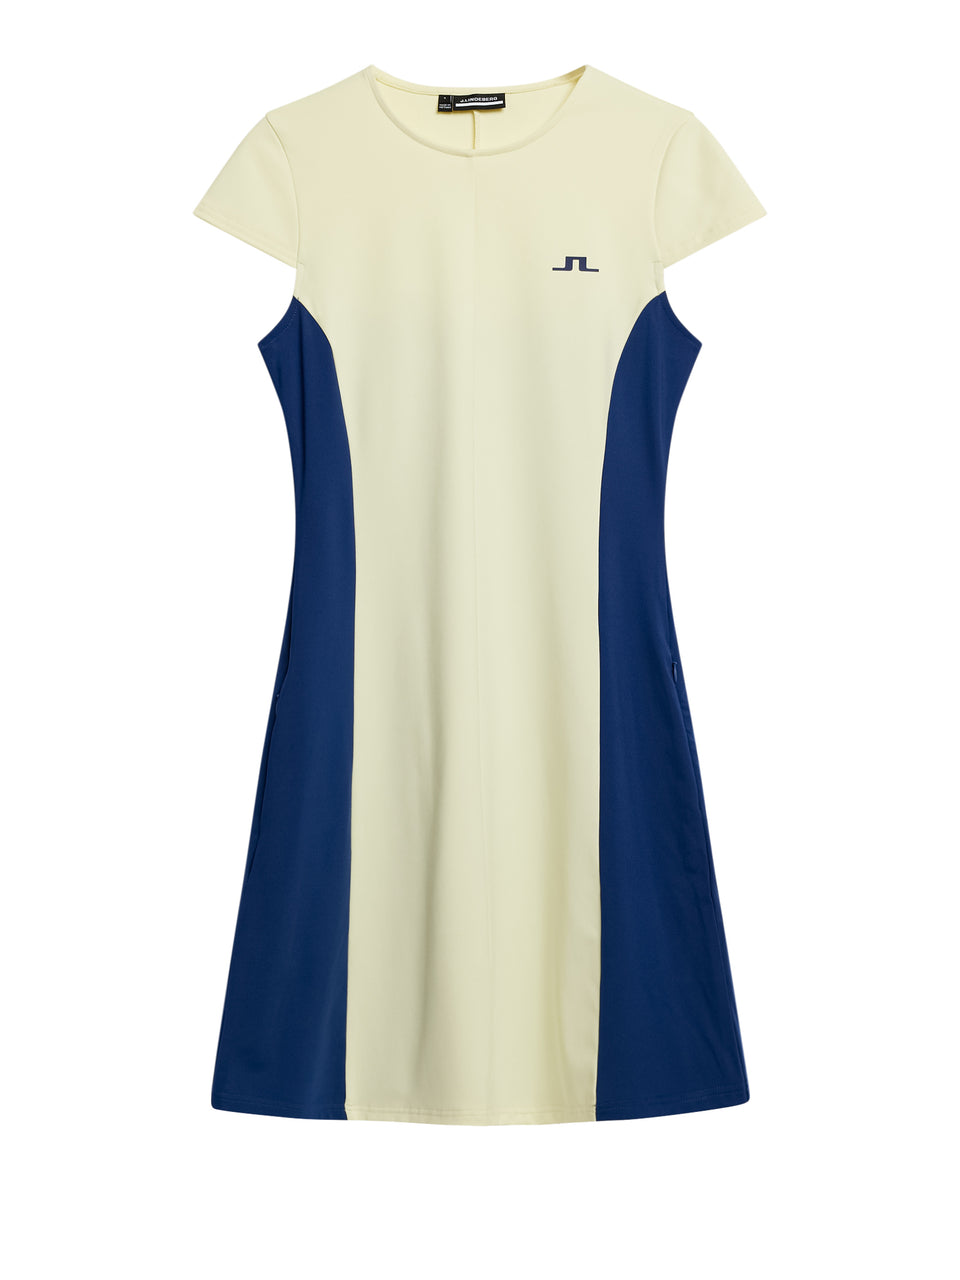 Lady's Golf Dress Gw-014 $5 - Wholesale China Lady's Golf Dress at Factory  Prices from Shijiazhuang Neming Import & Export Co. Ltd